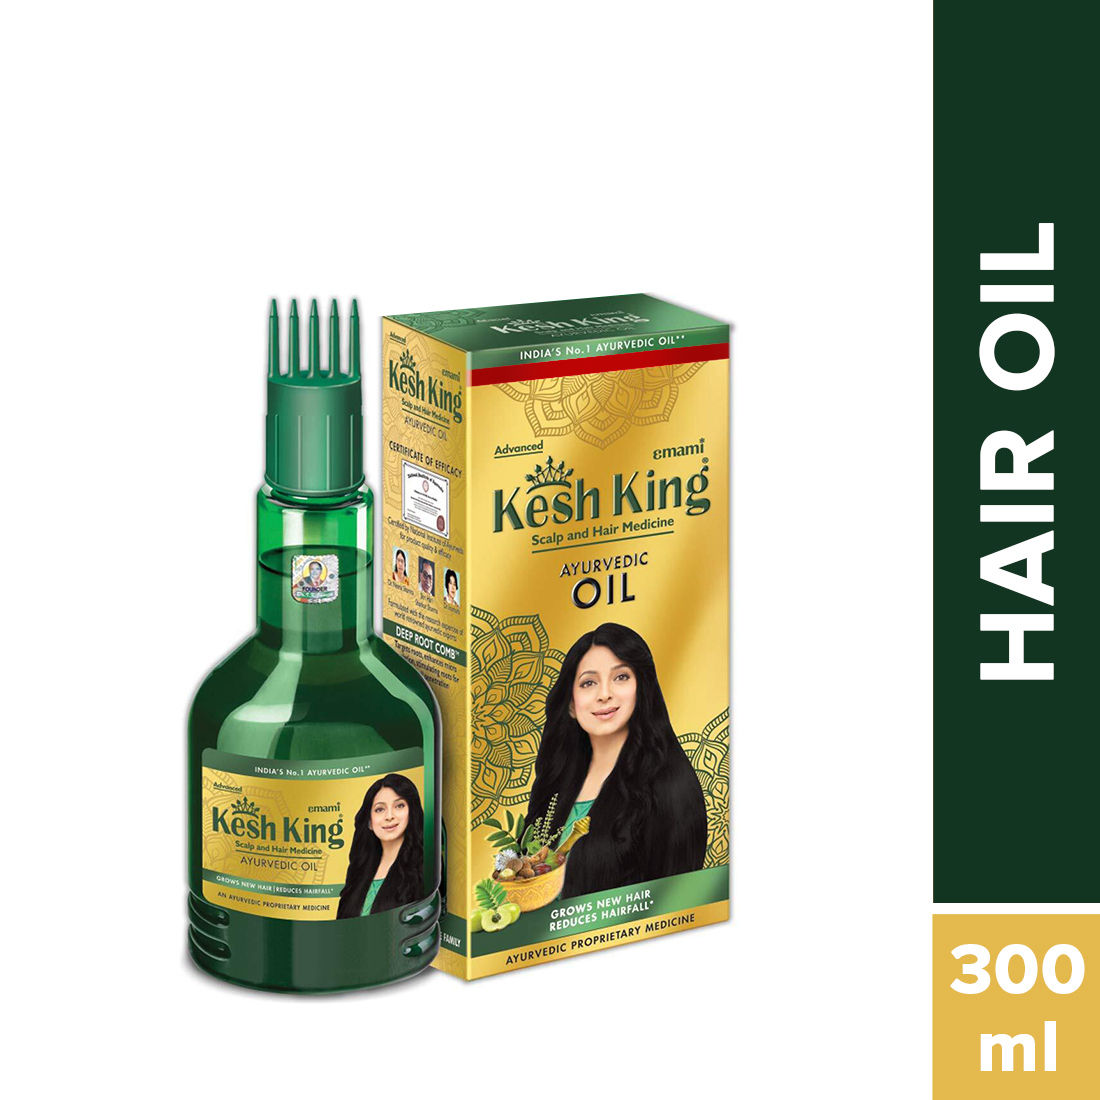 Kesh King Ayurvedic Scalp and Hair Medicine Oil, 300 ml Price, Uses, Side  Effects, Composition - Apollo Pharmacy